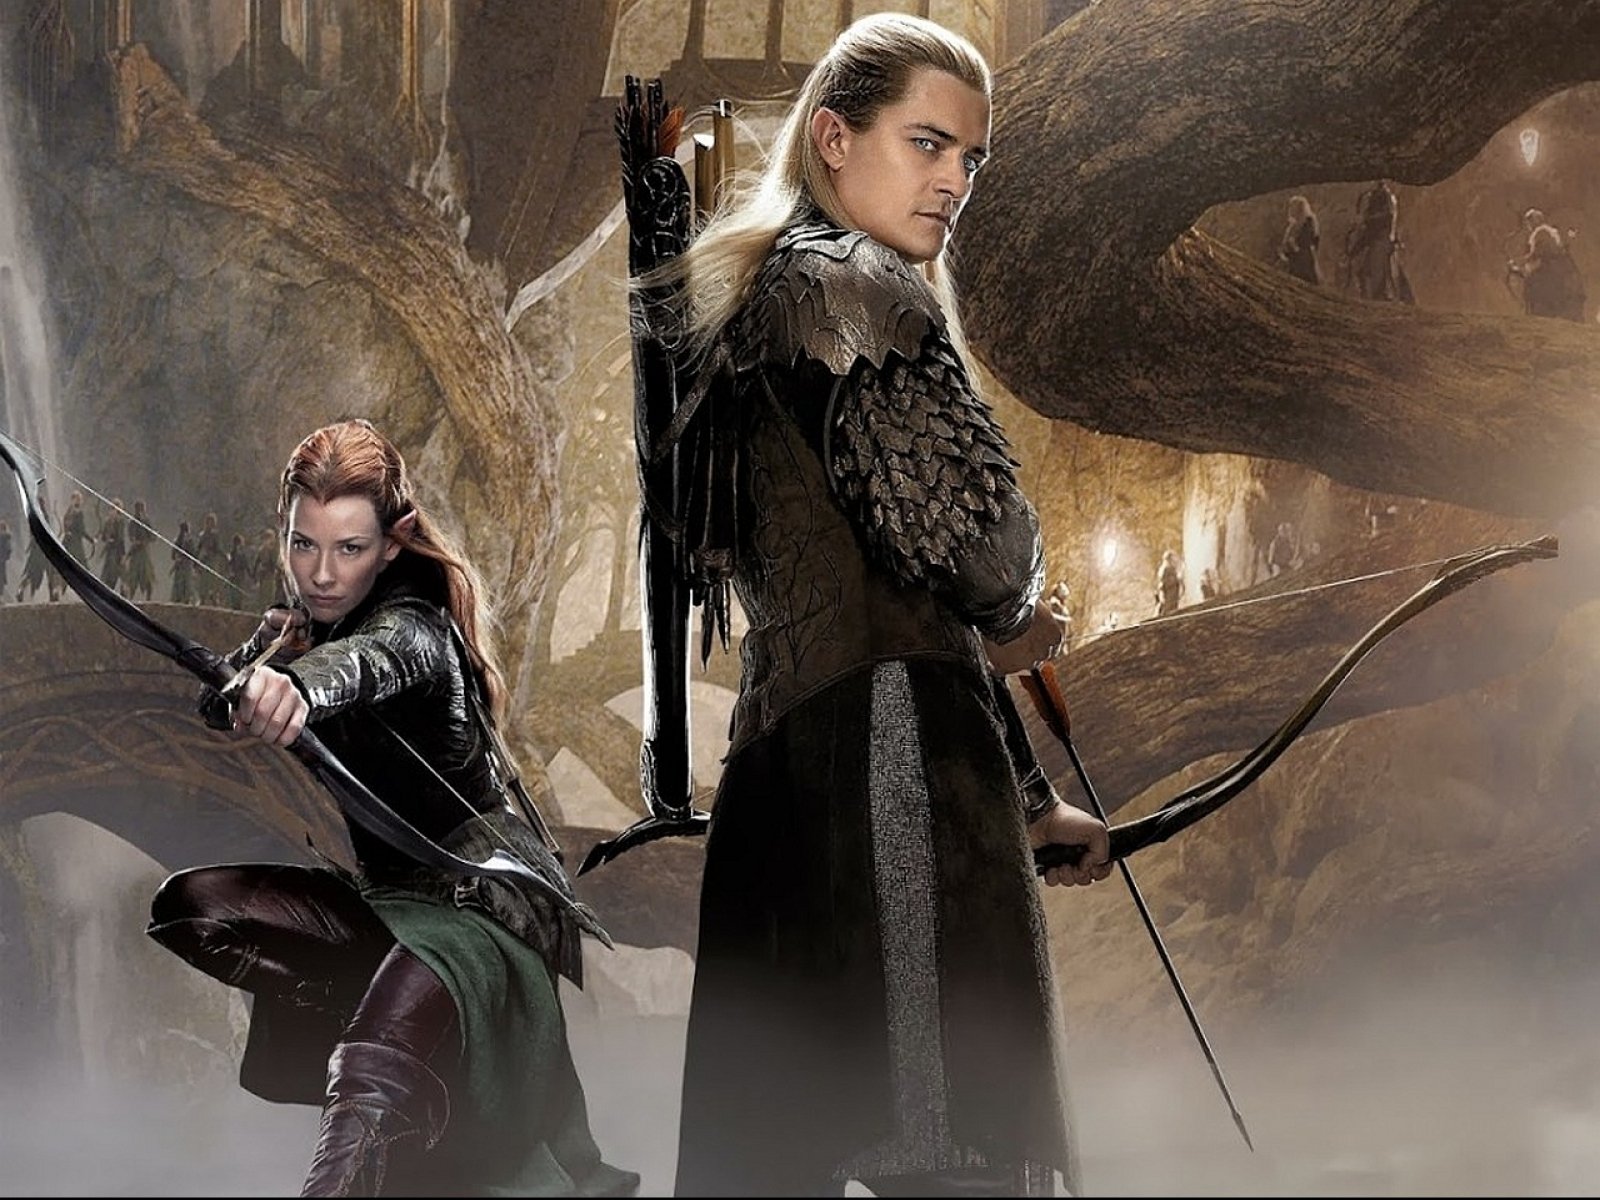 for android download The Hobbit: The Desolation of Smaug